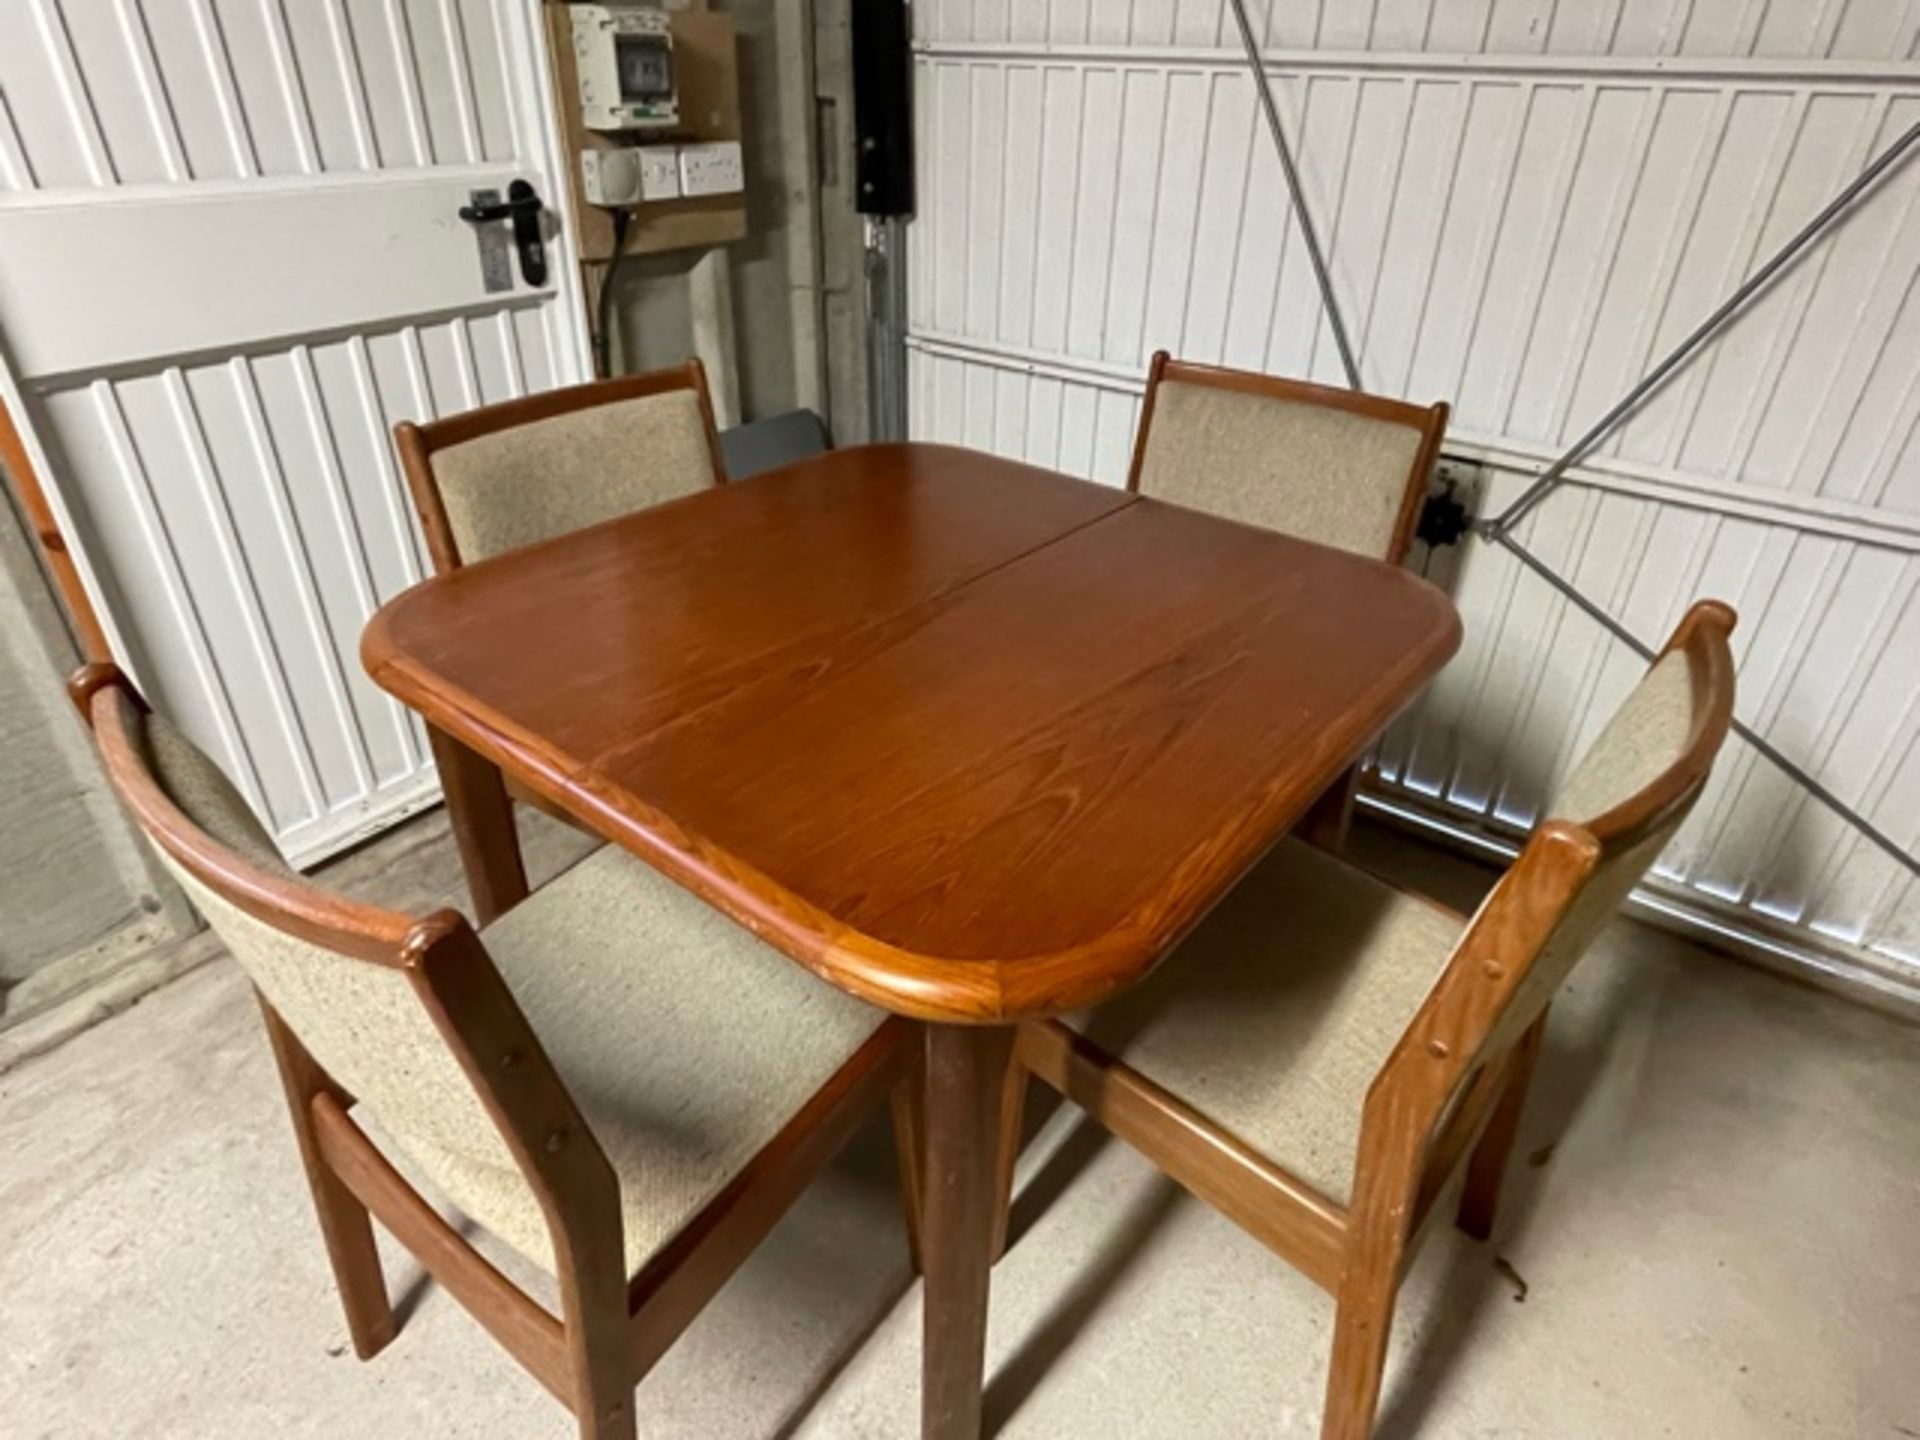 1 x G Plan Teak Dining Suite With Extendable Table and 4 Upholstered Teak Chairs - CLTBC - Location: - Image 3 of 4